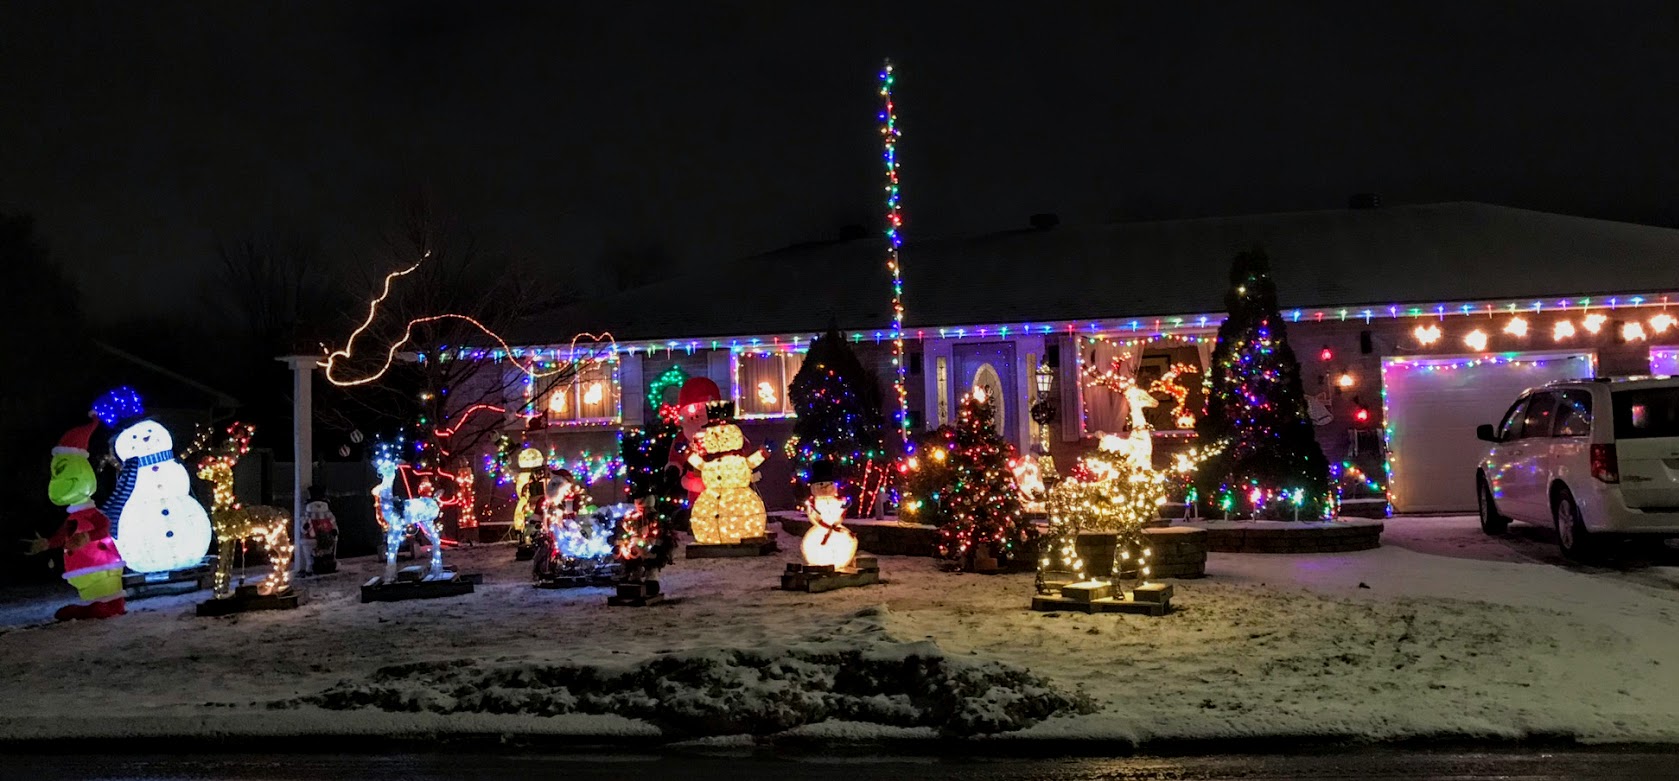 Winning house decorated in lights from 2020